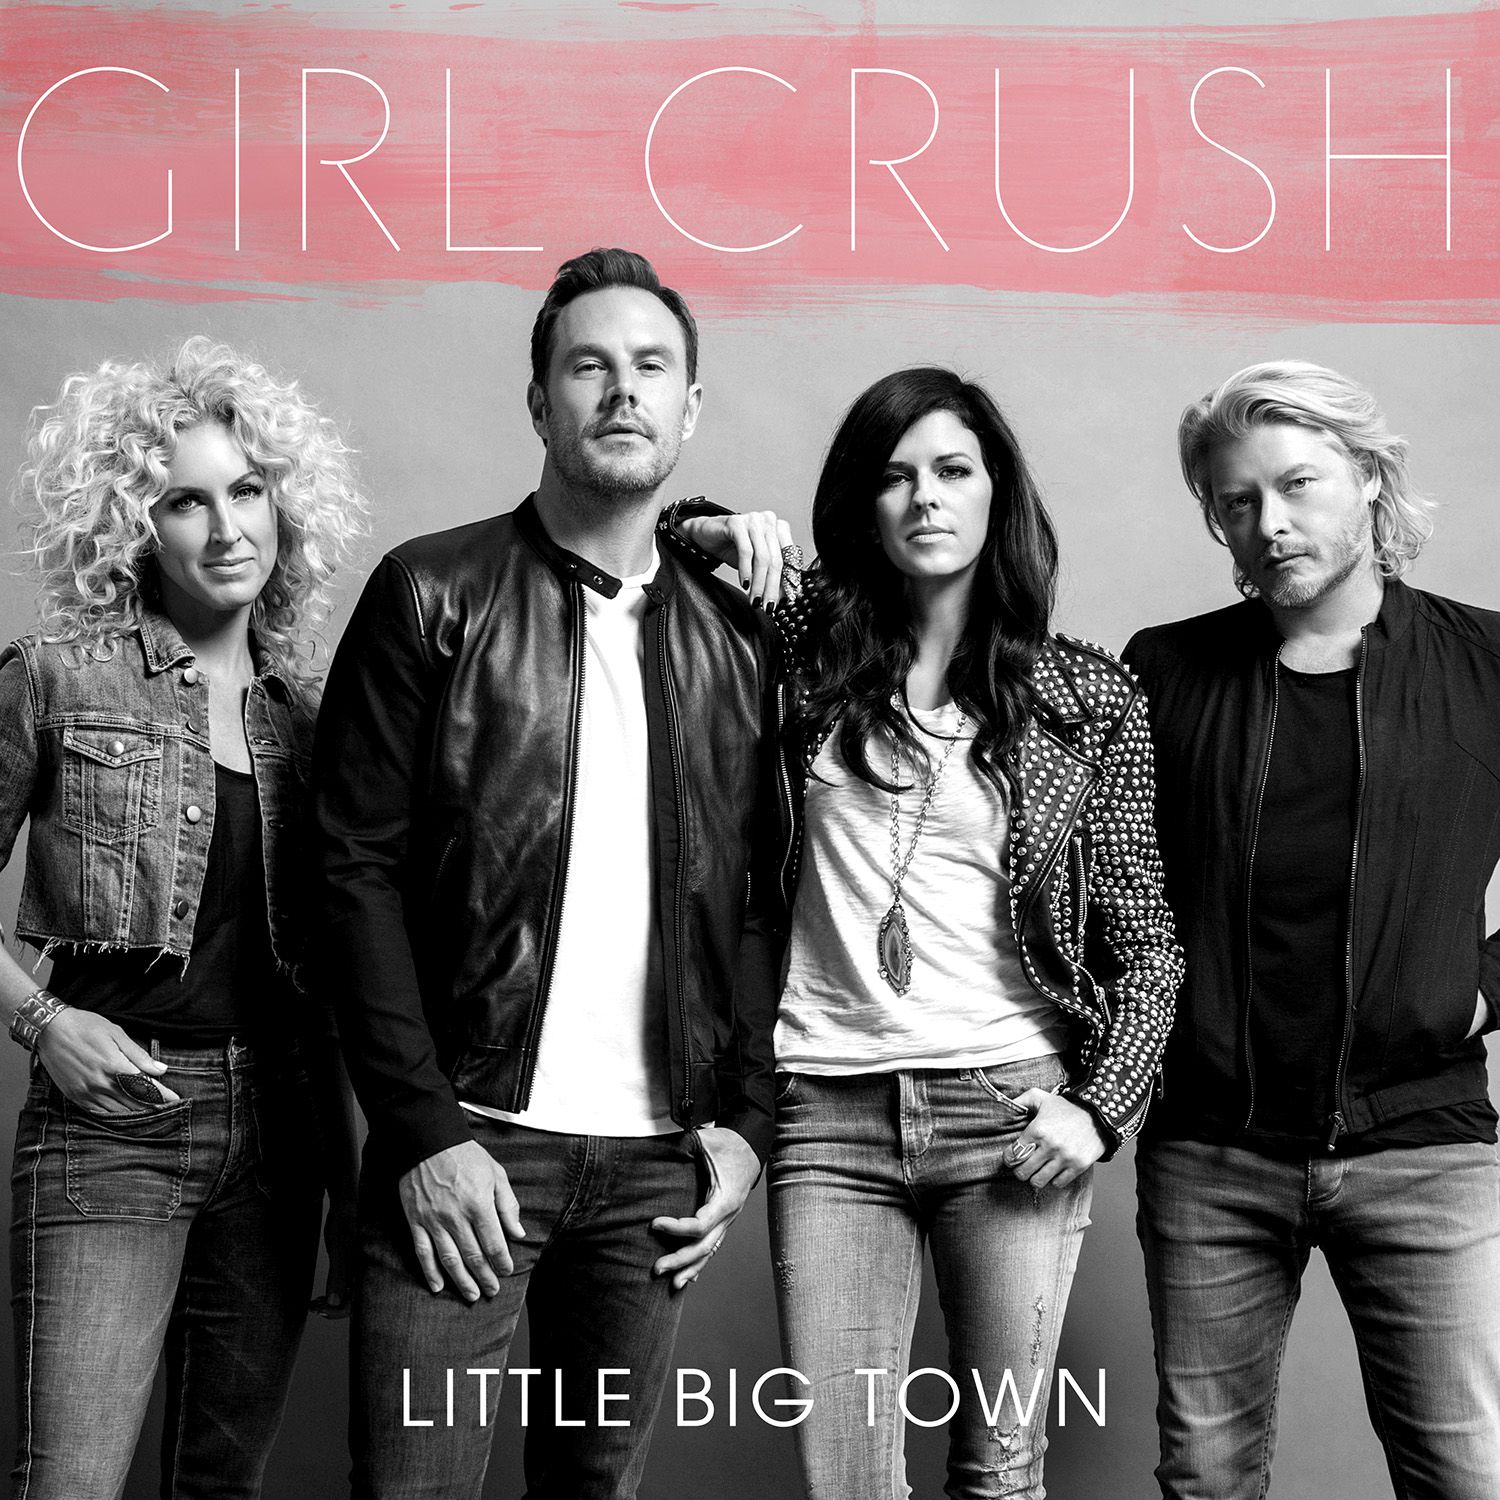 LITTLE BIG TOWN SURPRISED BY RIAA WITH DOUBLE-PLATINUM PLAQUE FOR GRAMMY AWARD-WINNING HIT, “GIRL CRUSH”